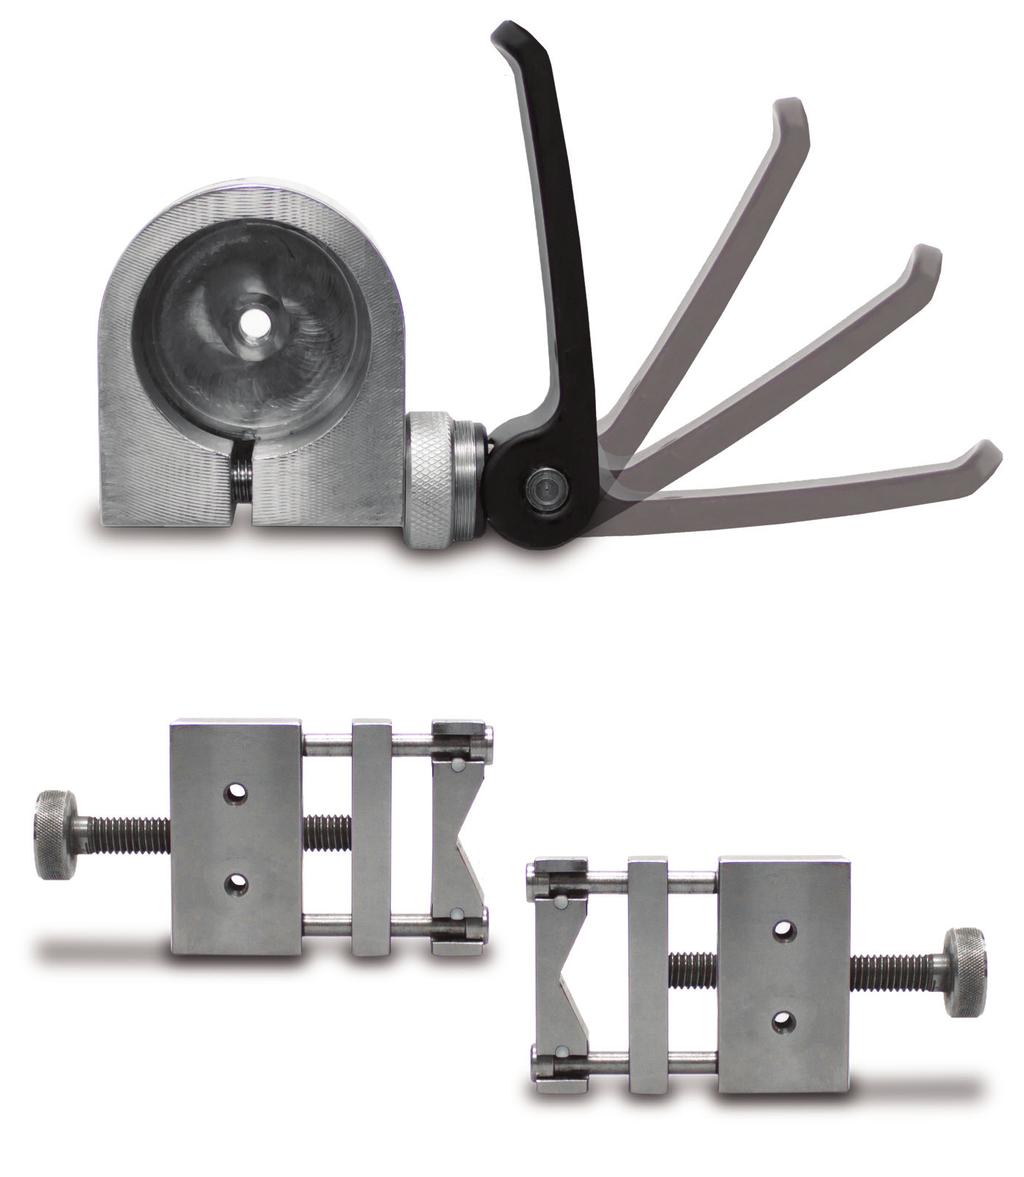 Quick Clamp Vise Single Saddle Chuck Available in 10 different